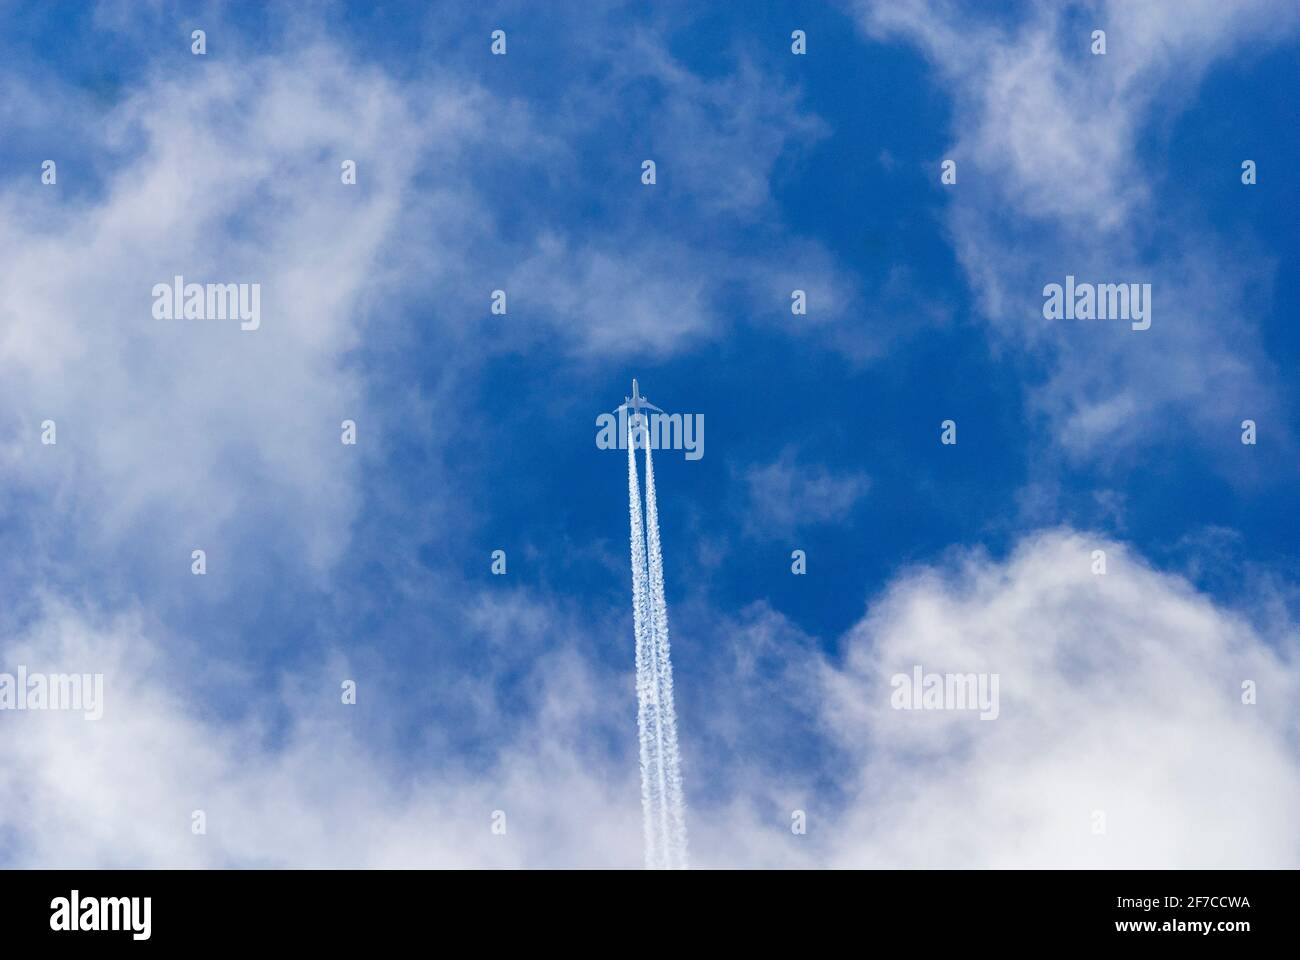 Twin engined jet aeroplane leaves contrails across deep blue sky with white clouds. Stock Photo